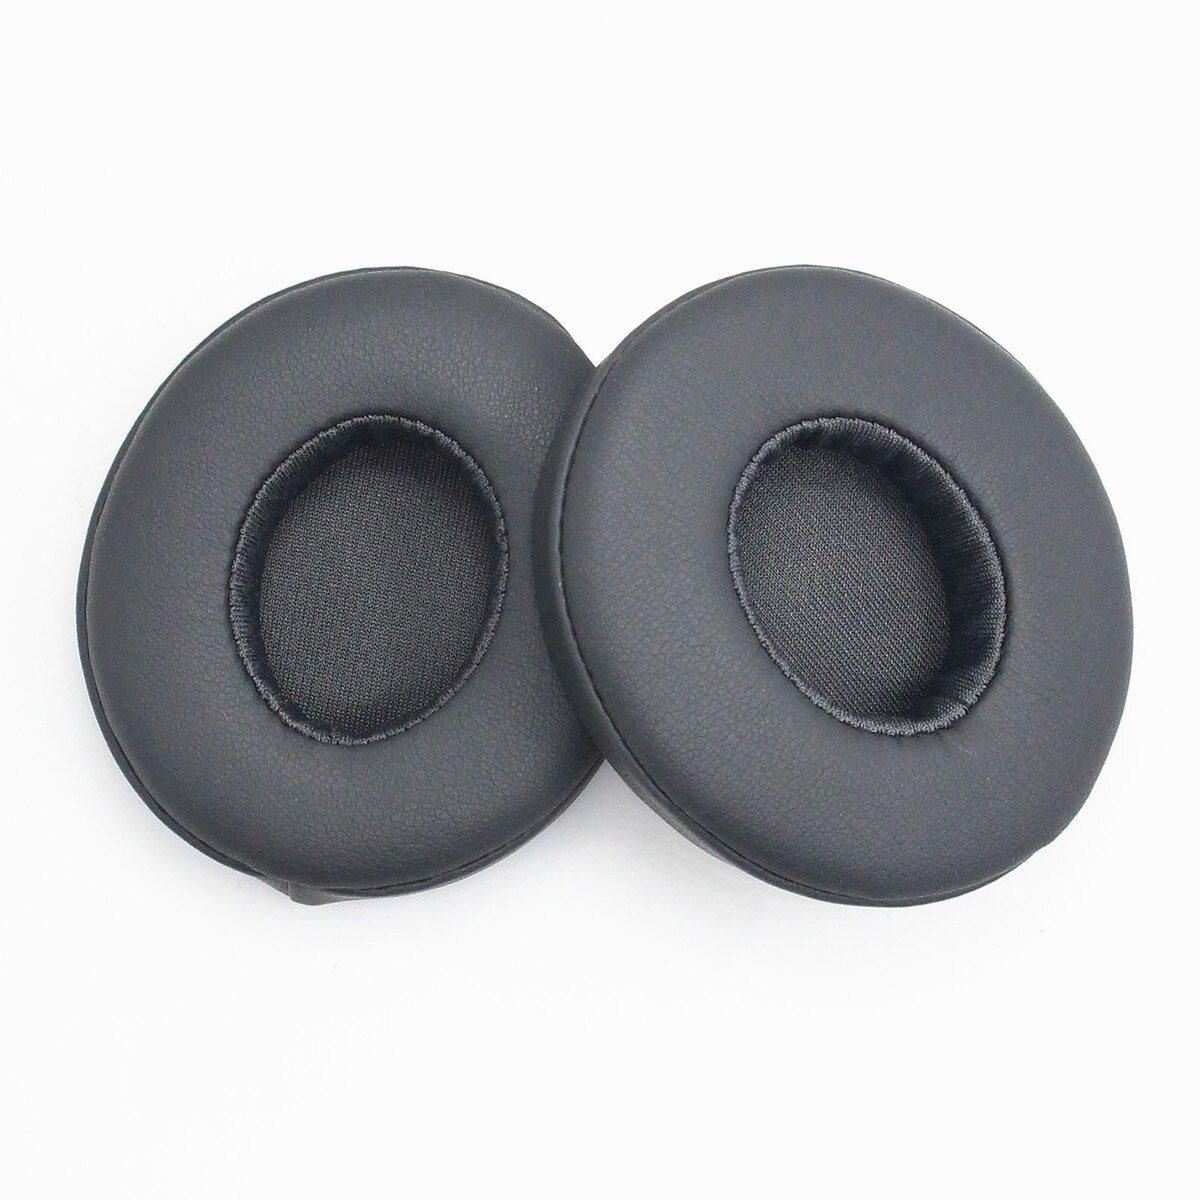 Replacement Soft Foam Ear Pads Cushions for Solo 2 & 3 Wireless On Ear Headphones Earpad Gray high quality